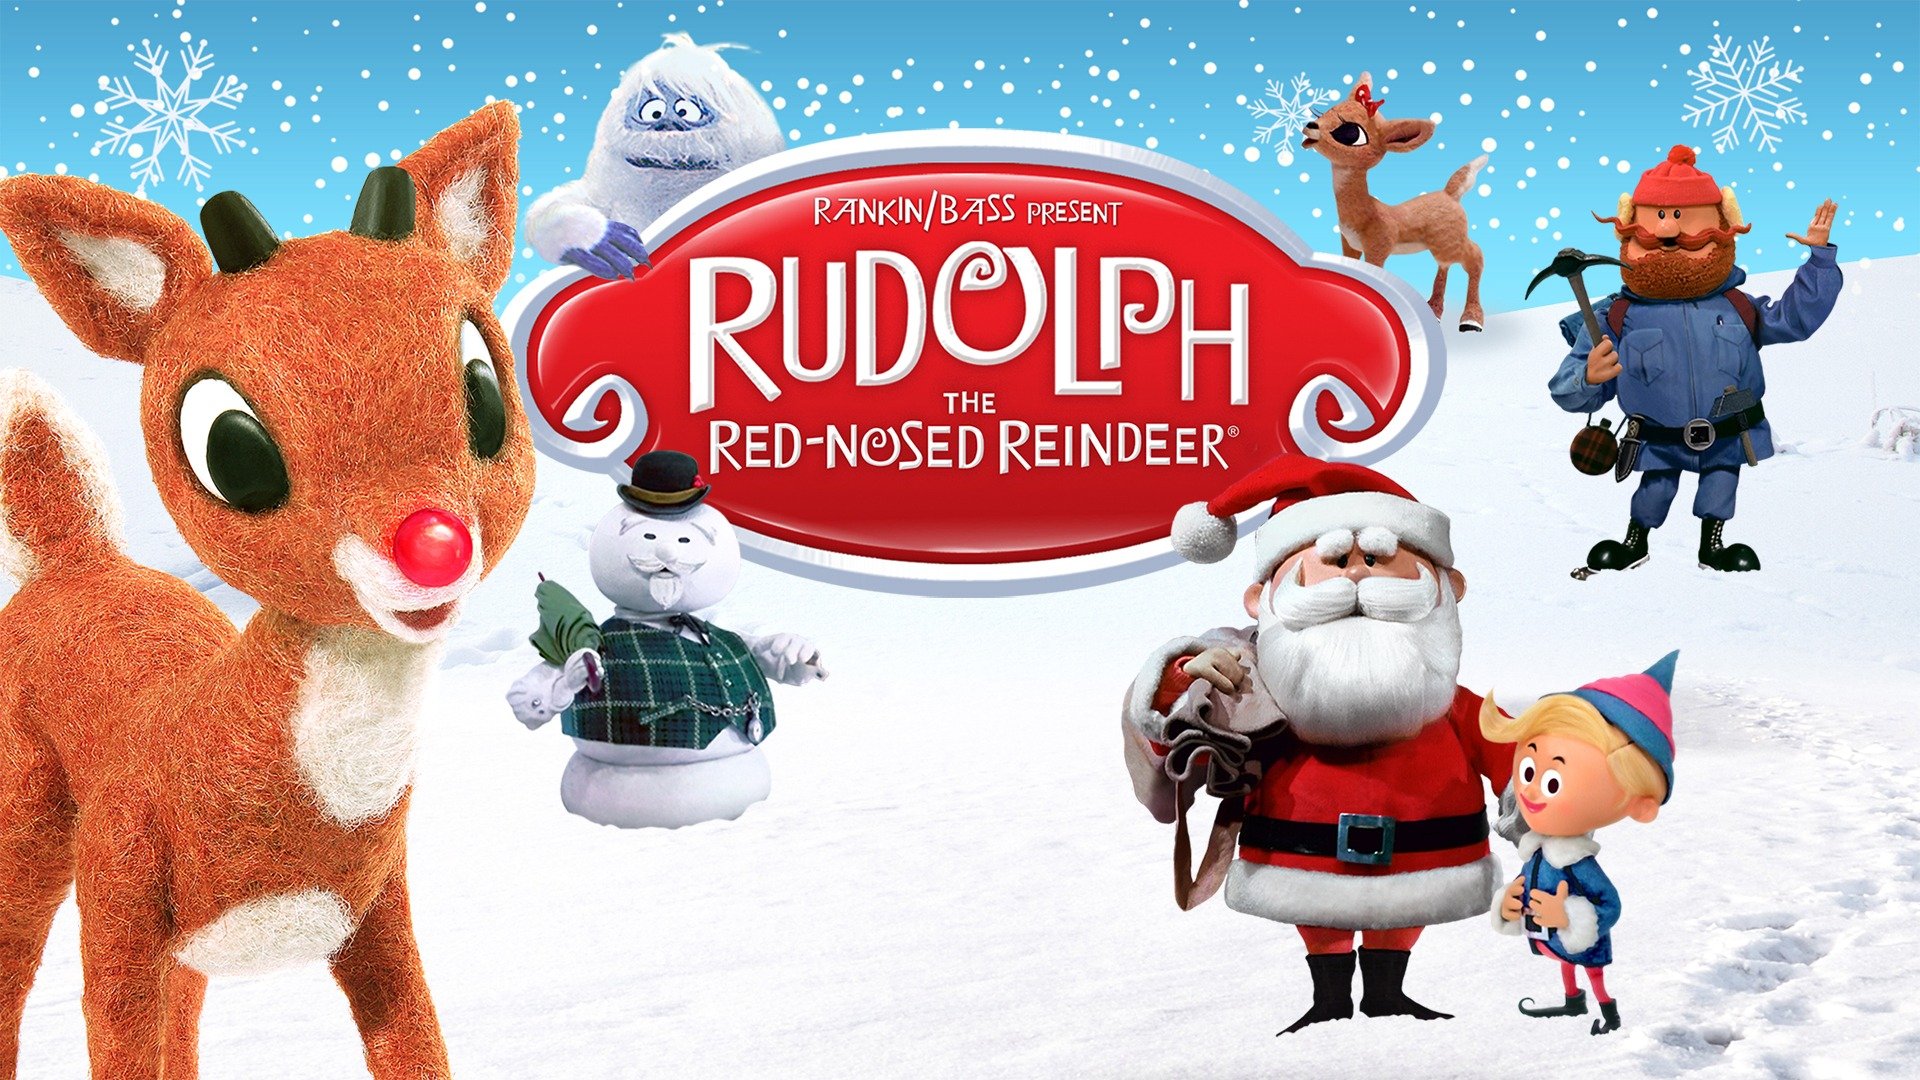 Rudolph the Red Nosed Reindeer 